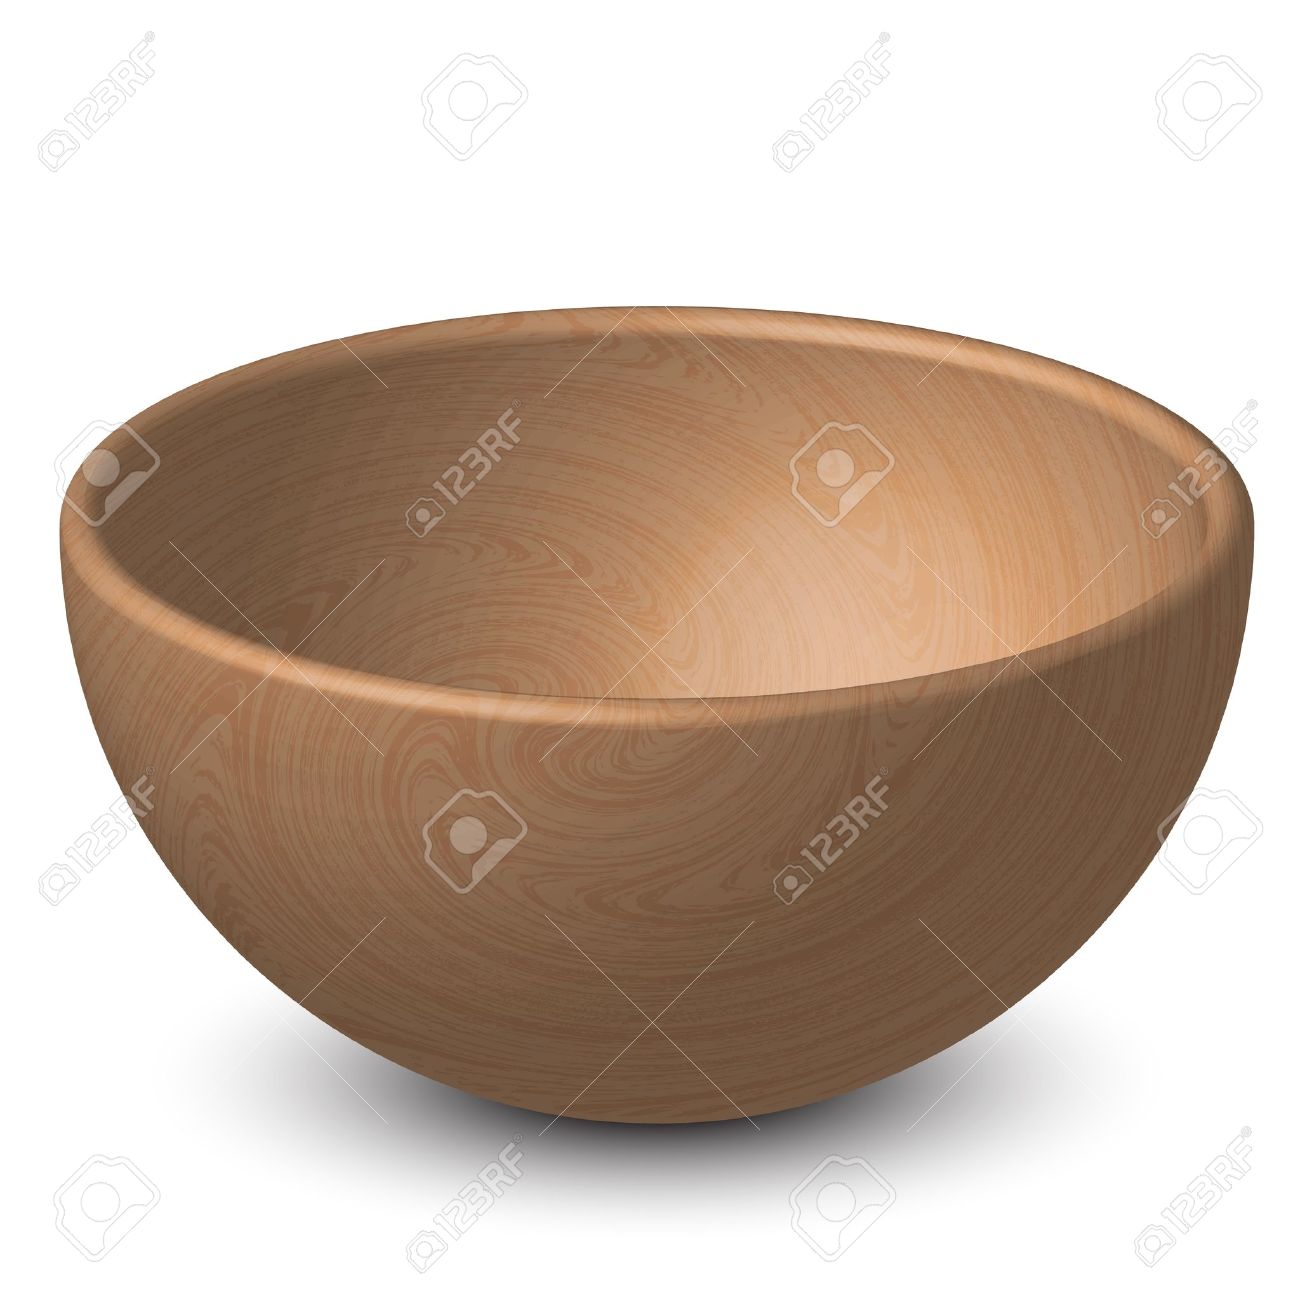 Illustration Of Wooden Bowl Royalty Free Cliparts, Vectors, And.